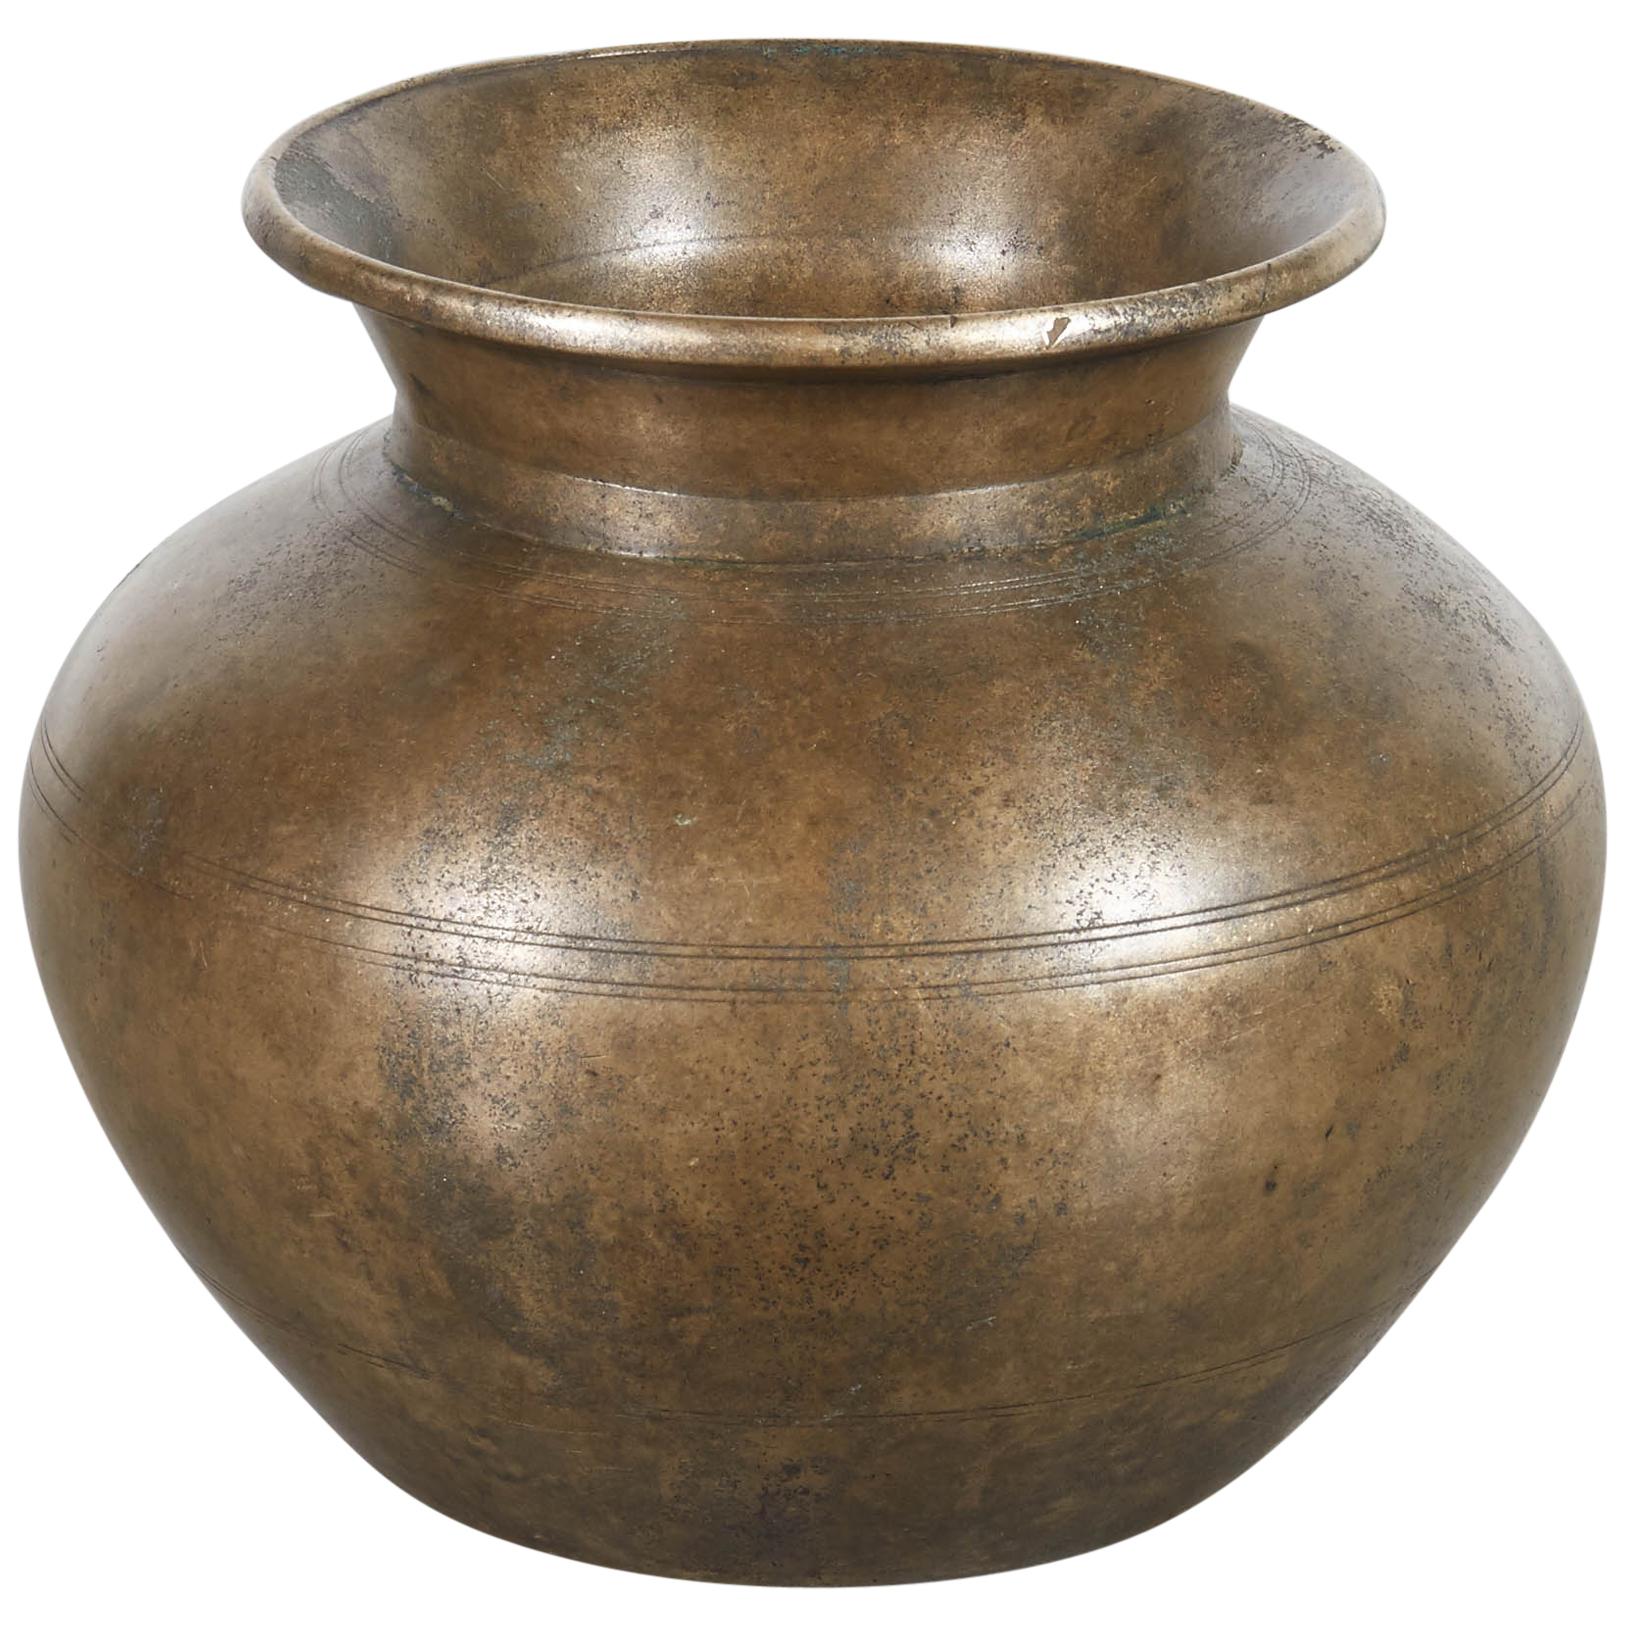 Antique Bronze Holy Water Vessel from Nepal